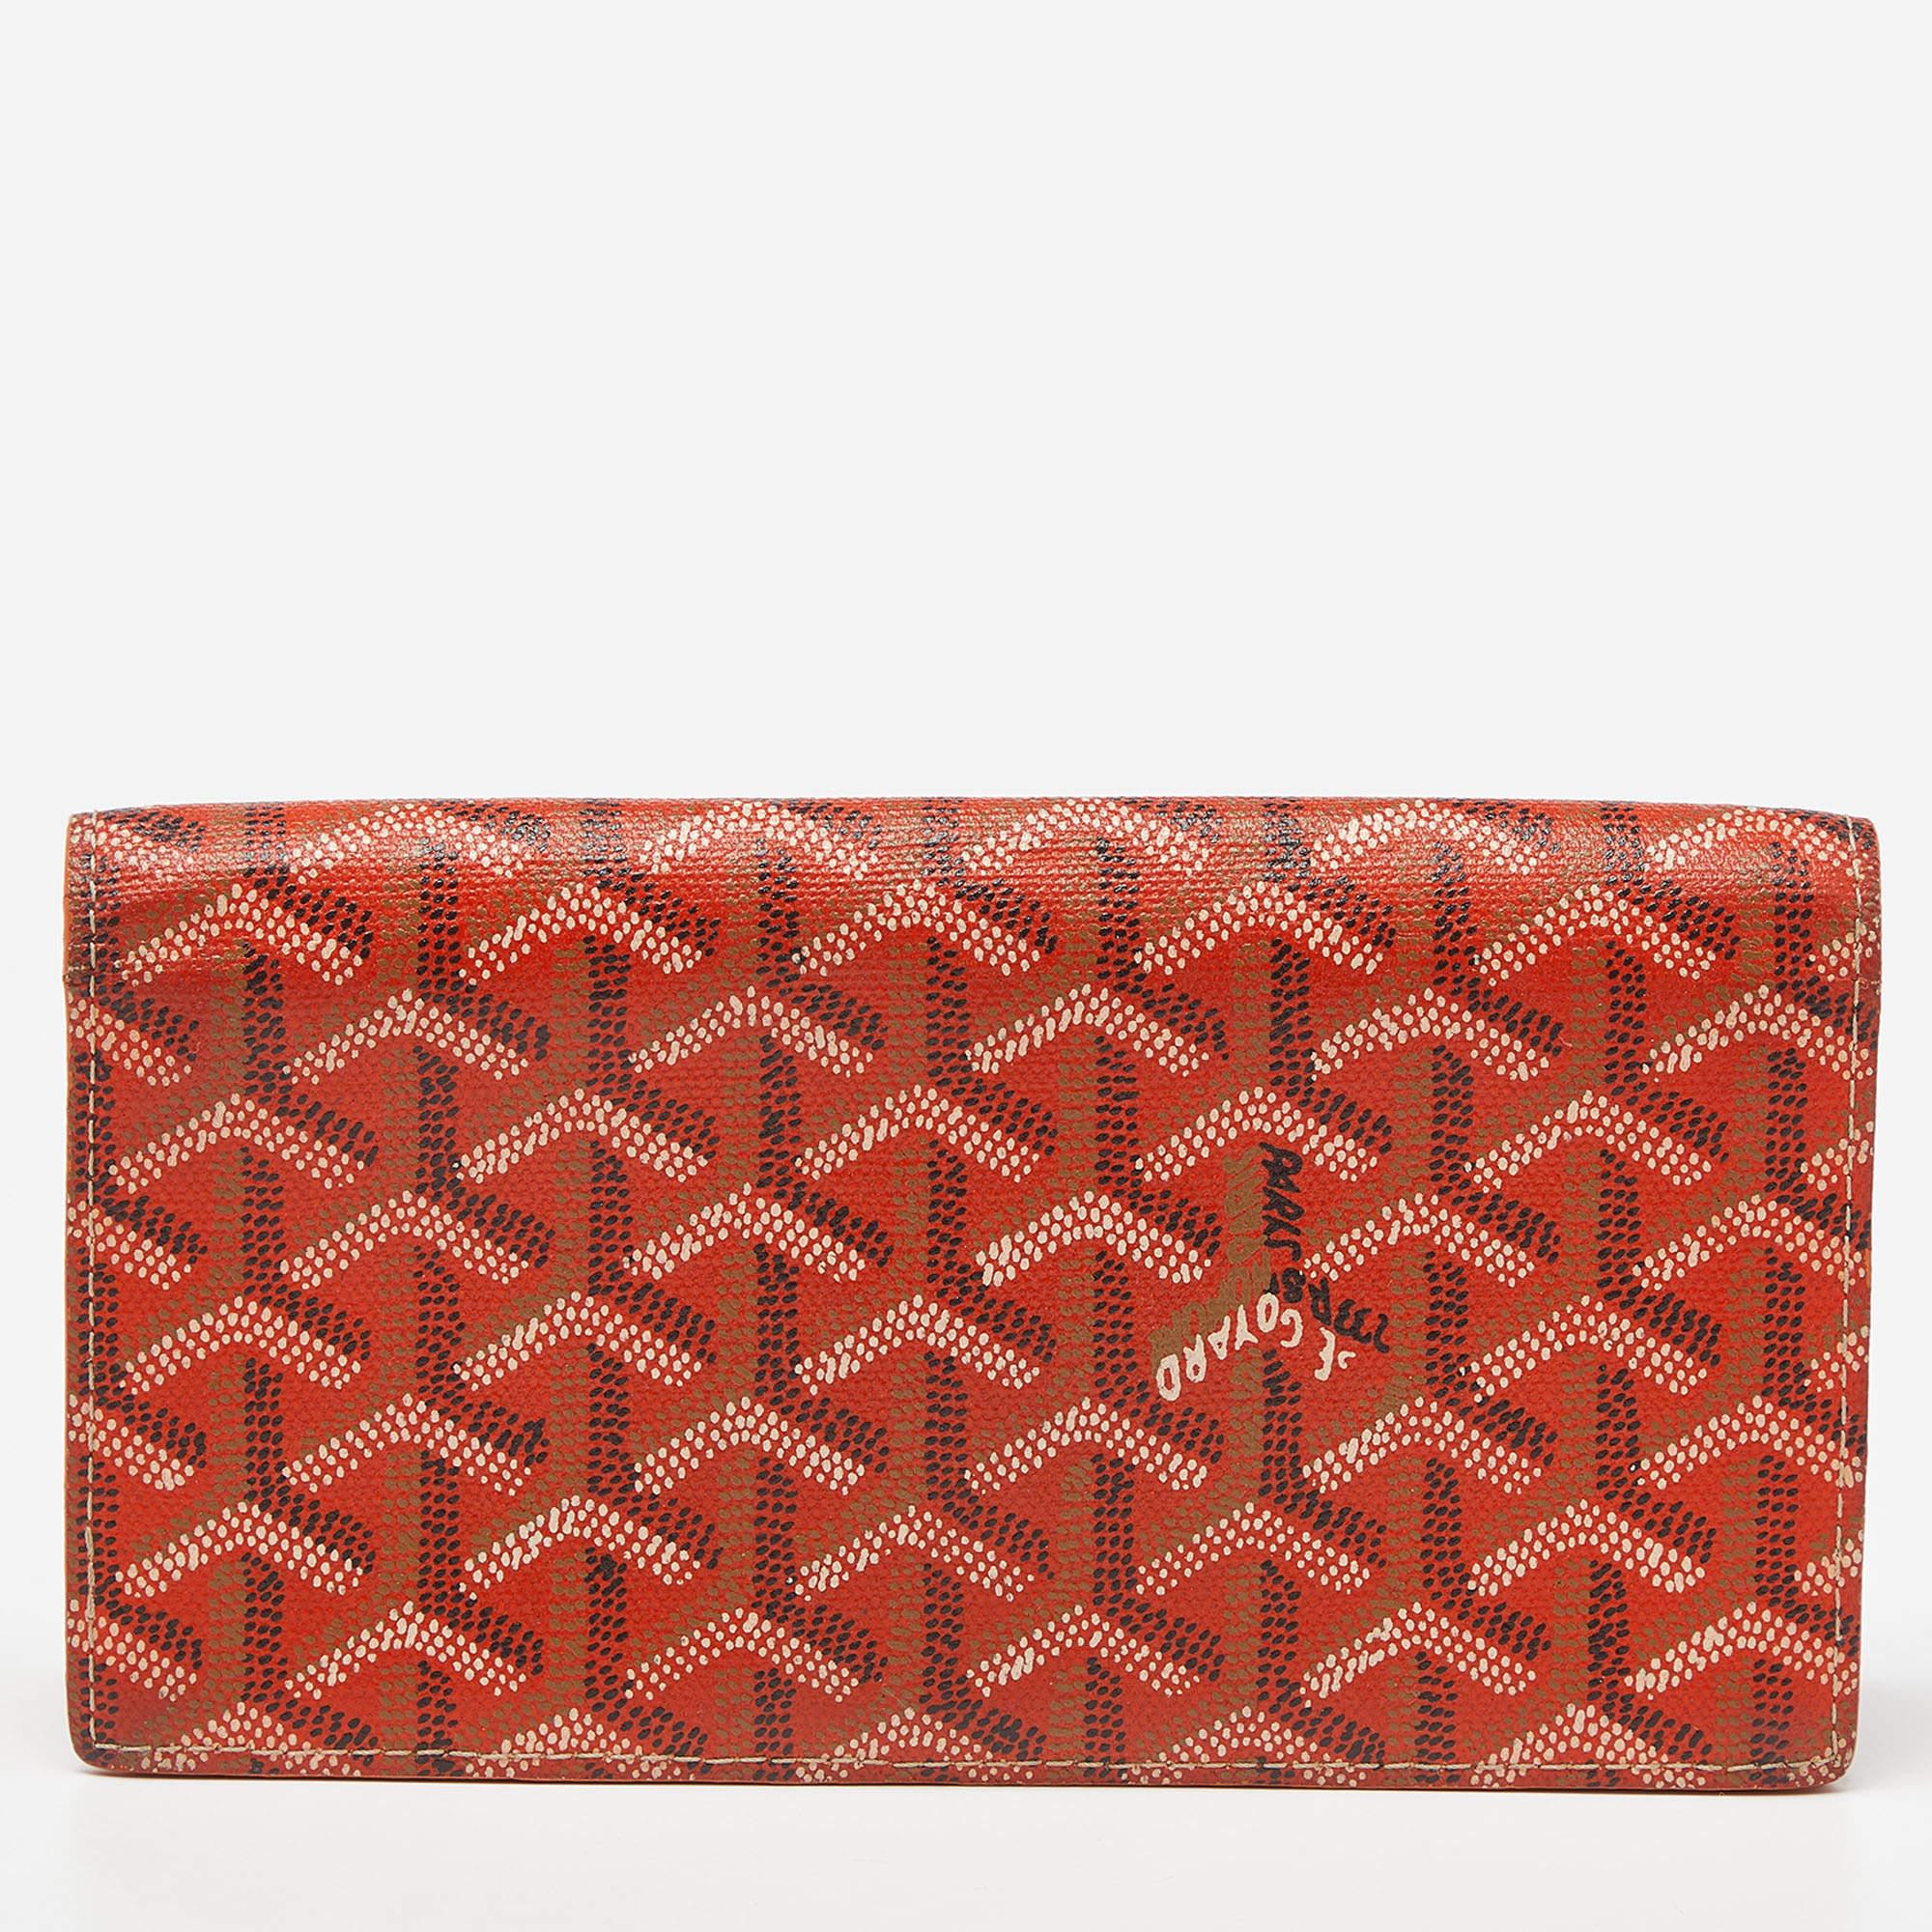 This authentic Goyard wallet for women brings along a touch of luxury and immense style. It comes perfectly crafted to neatly carry your cards and cash.

